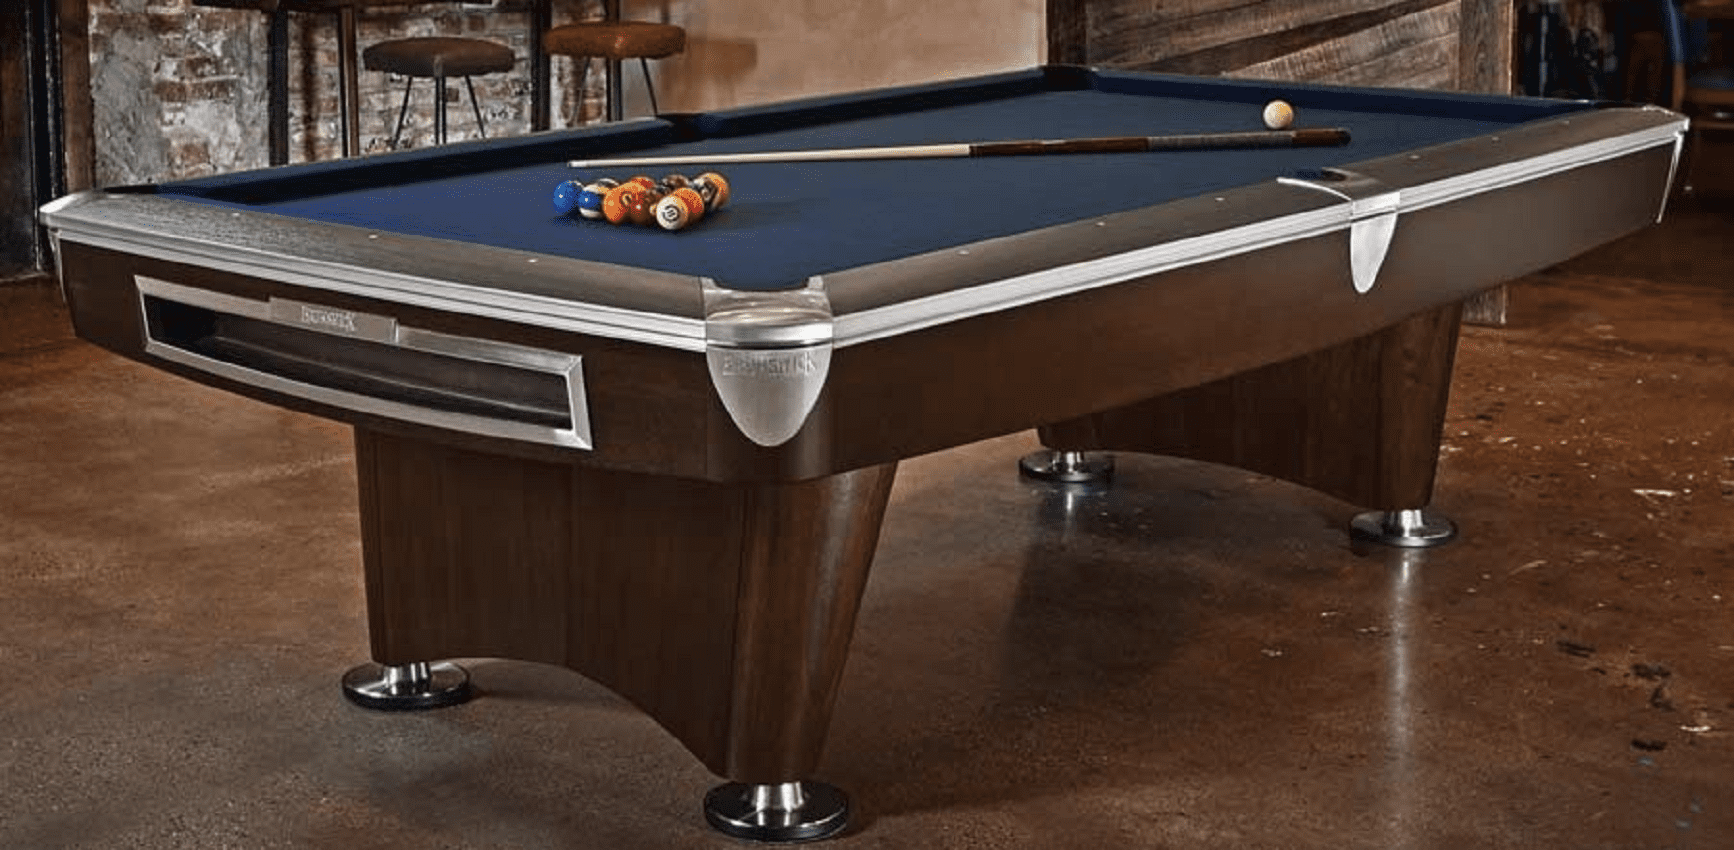 How a Pool Table Can Jumpstart Family Time – Pool Tables for Sale Truckee